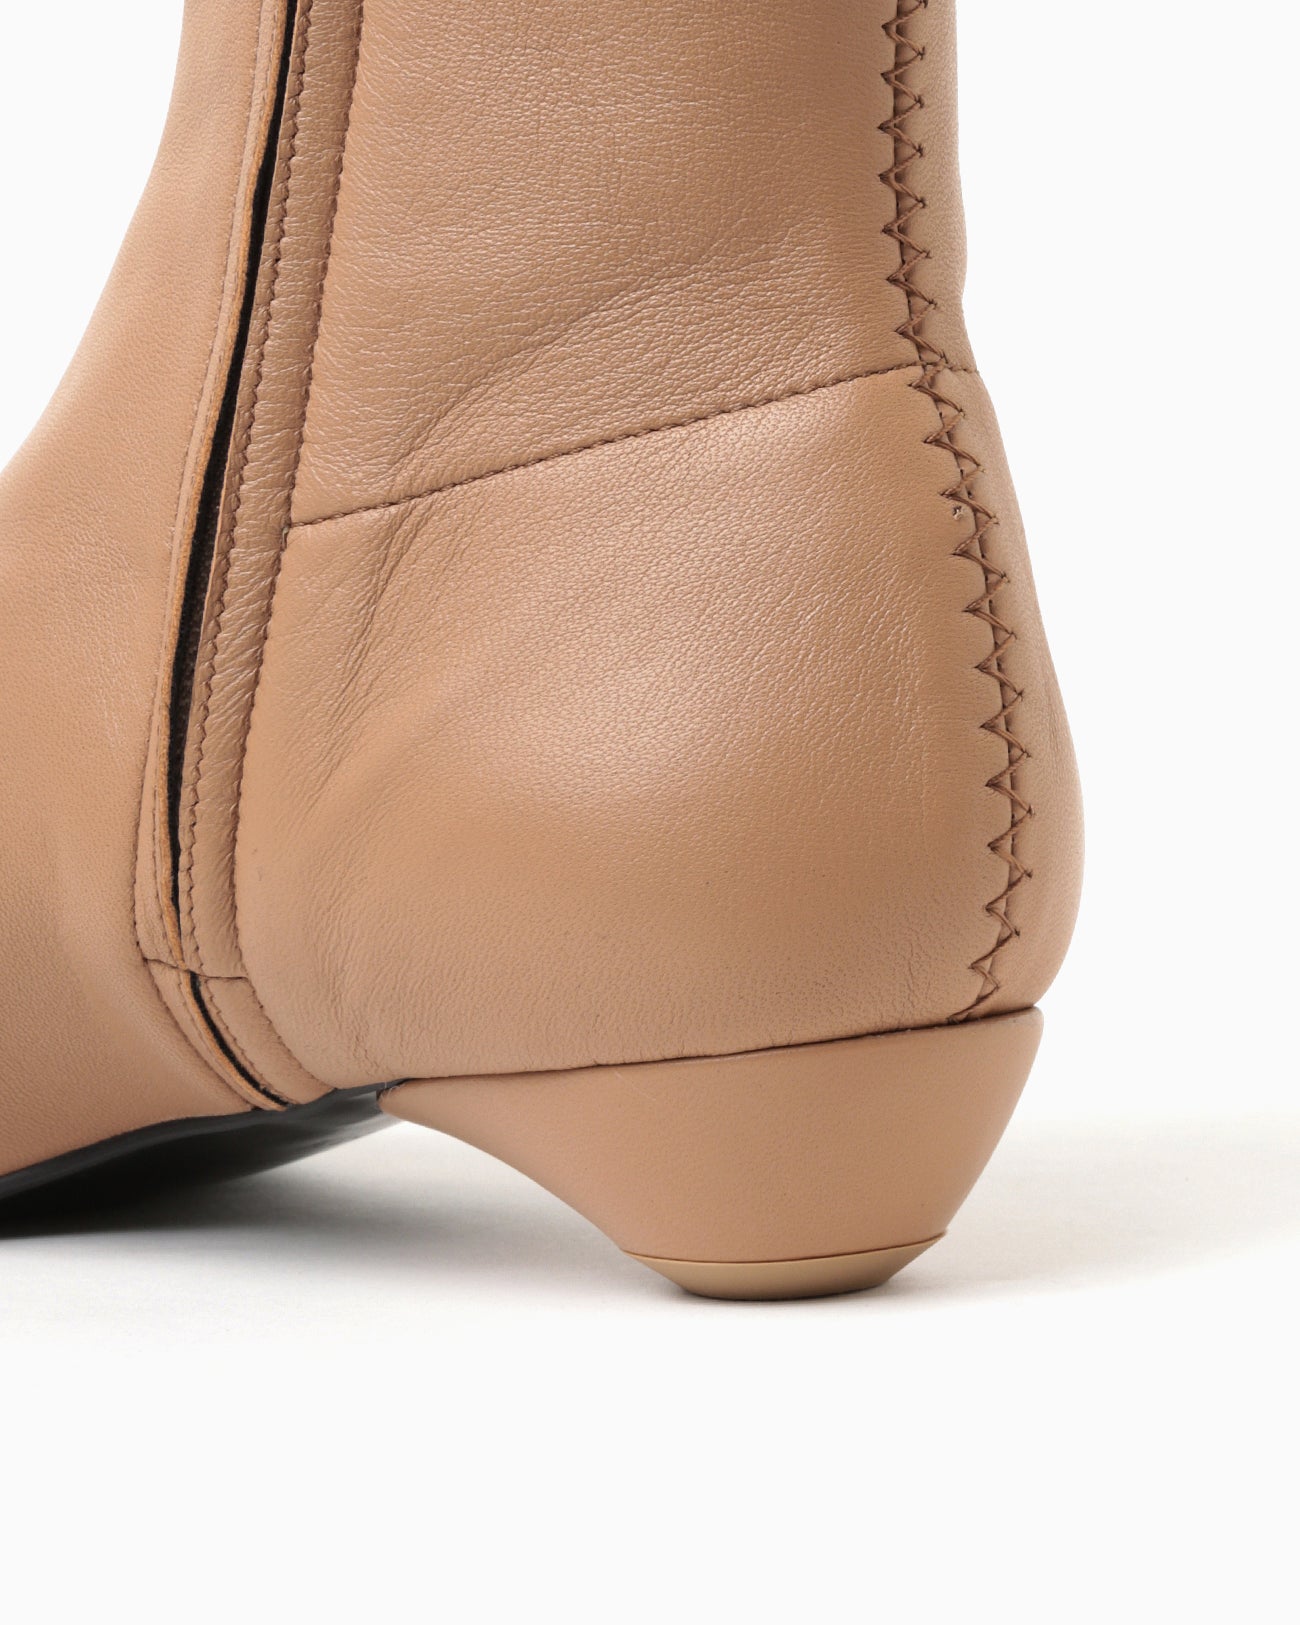 Smooth Leather Zip Style Boots - beige